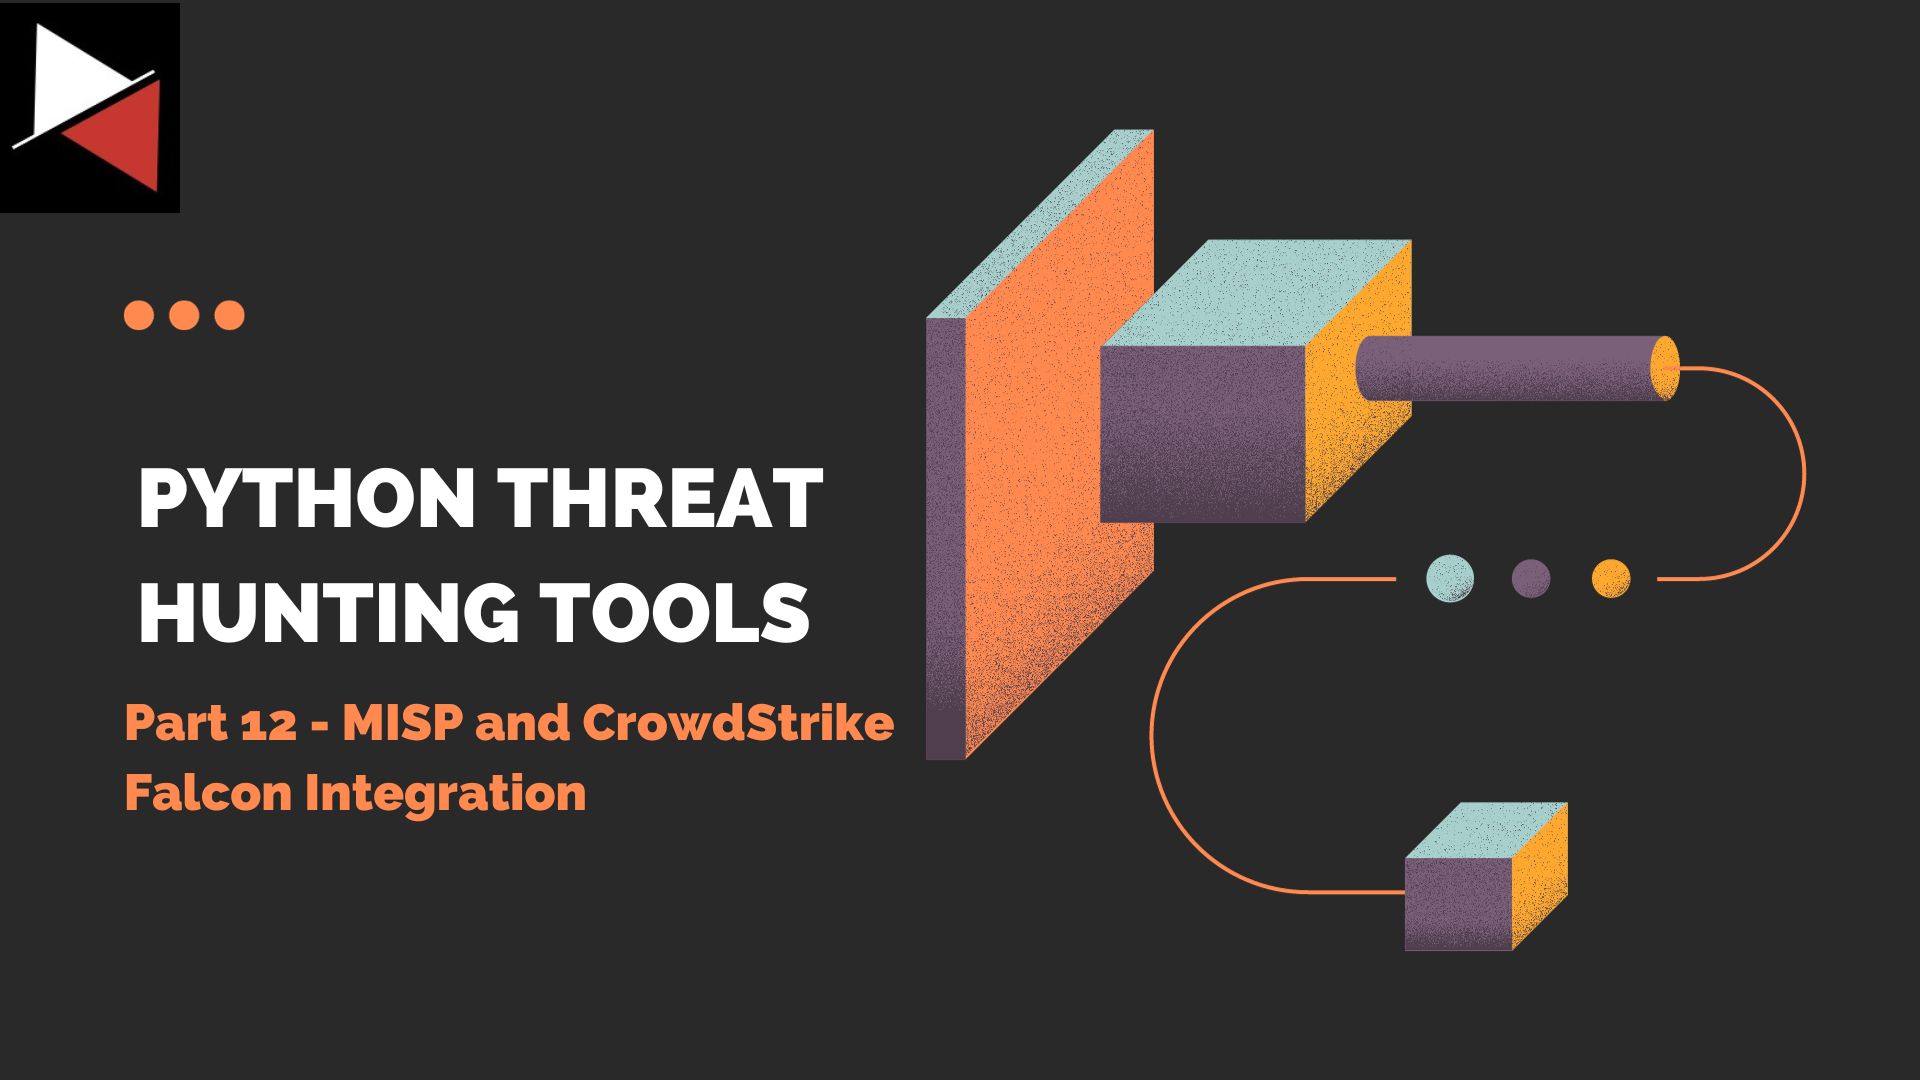 Python Threat Hunting Tools: Part 12 - MISP and CrowdStrike Falcon Integration